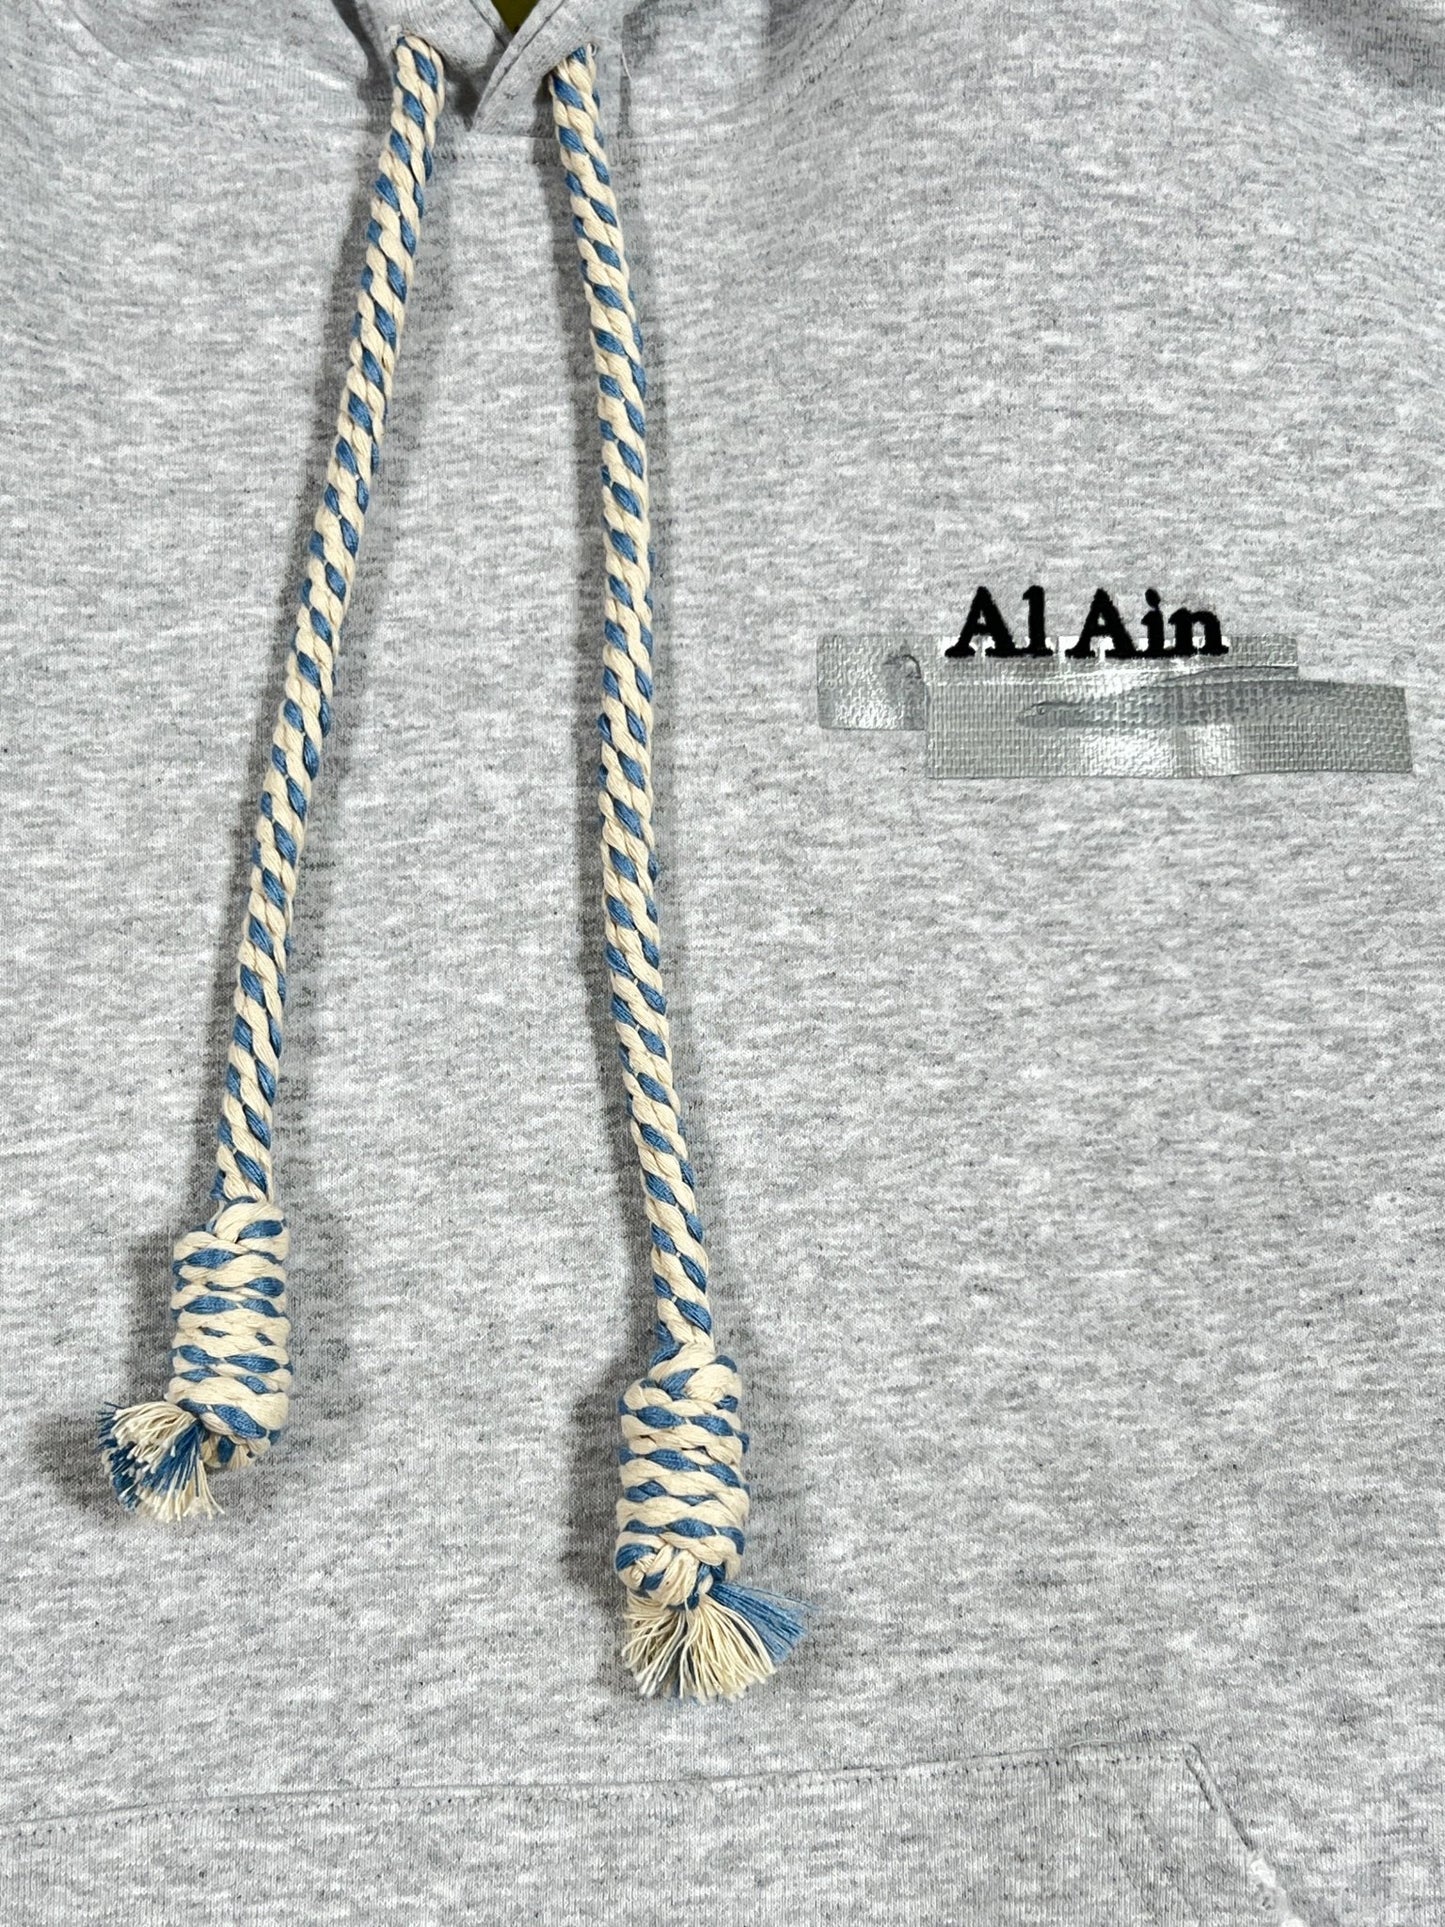 Close-up of a grey AL AIN AHOX S150 YACHT LIMITED hoodie with blue and white braided drawstrings. The text "AL AIN" is visible on the chest, partially covered by tape. Thick rope texture lace detail enhances the hoodie, giving it an extra touch of style.